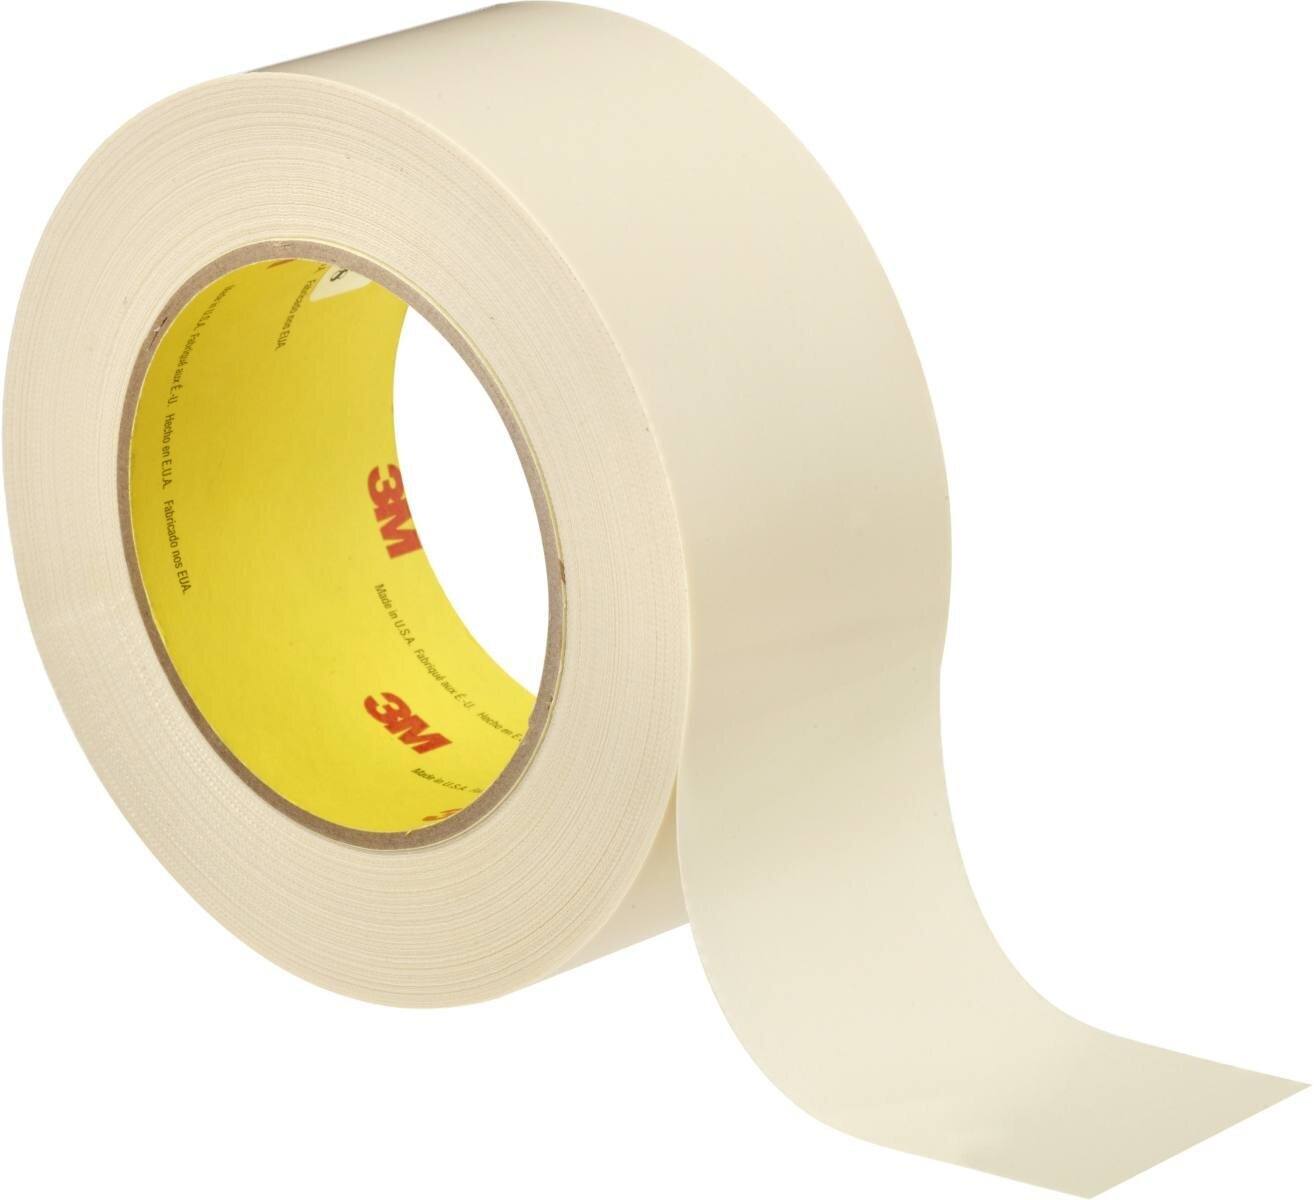 3M 5401 Traction Tape 100mmx33m